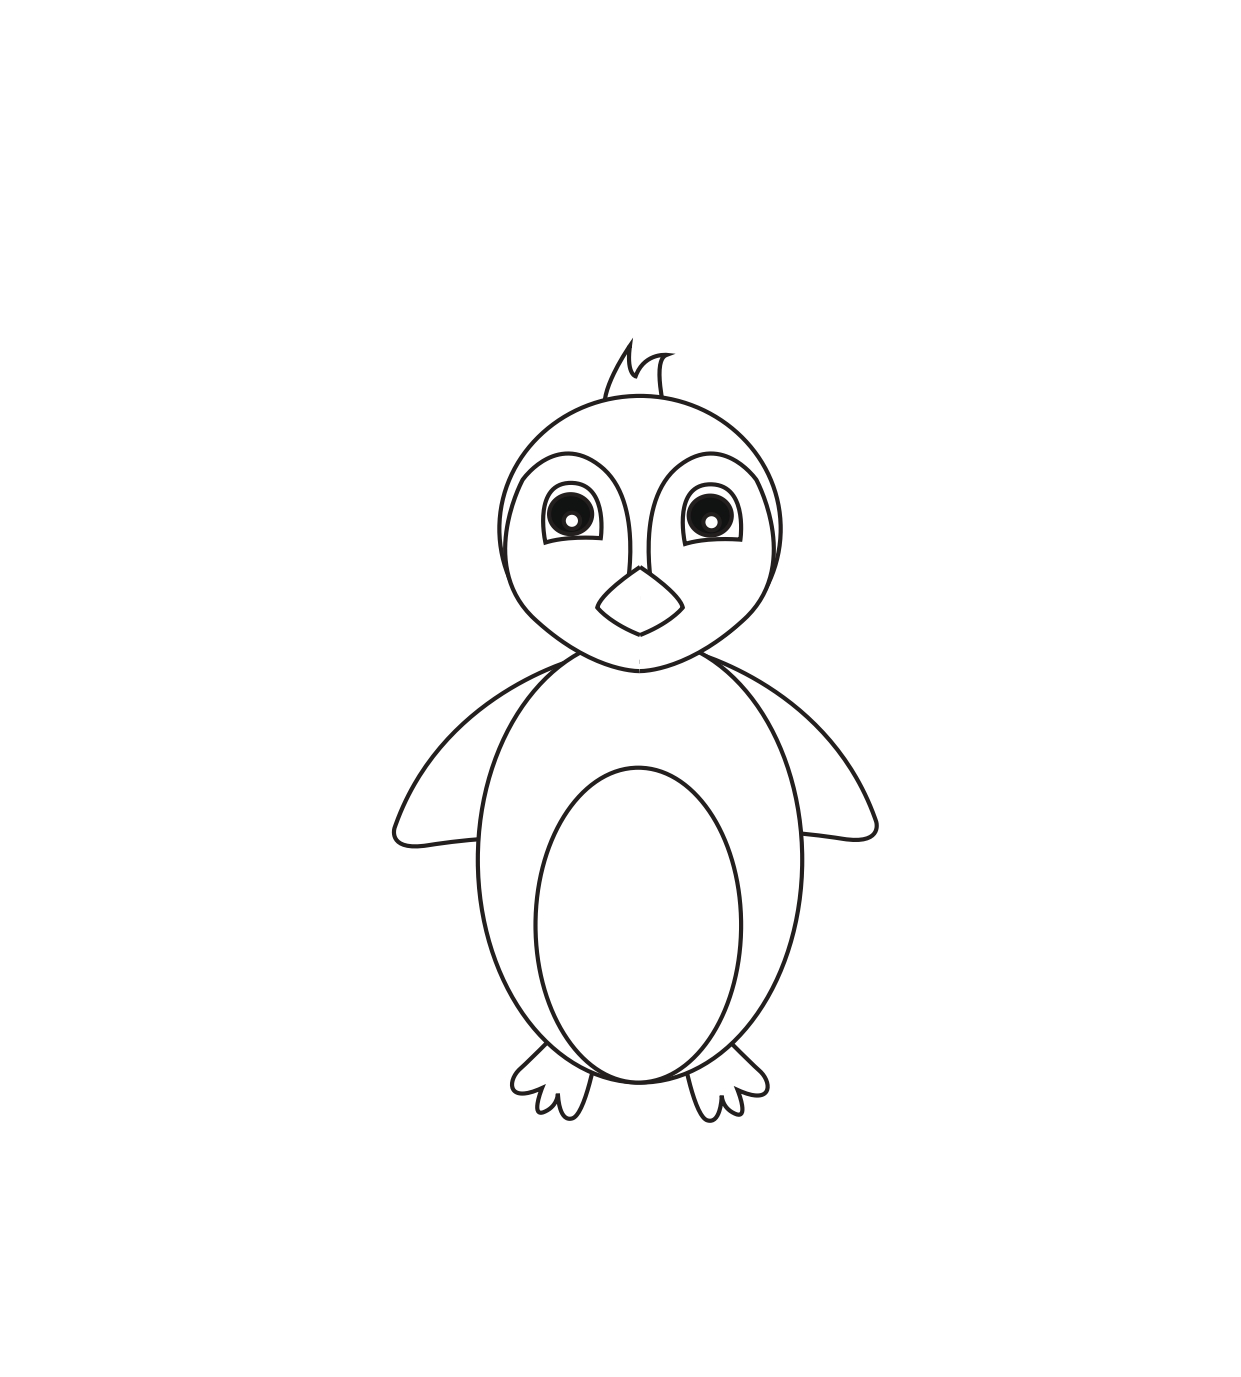 How to draw a simple penguin | Penguin drawing, Directed drawing  kindergarten, Penguin art